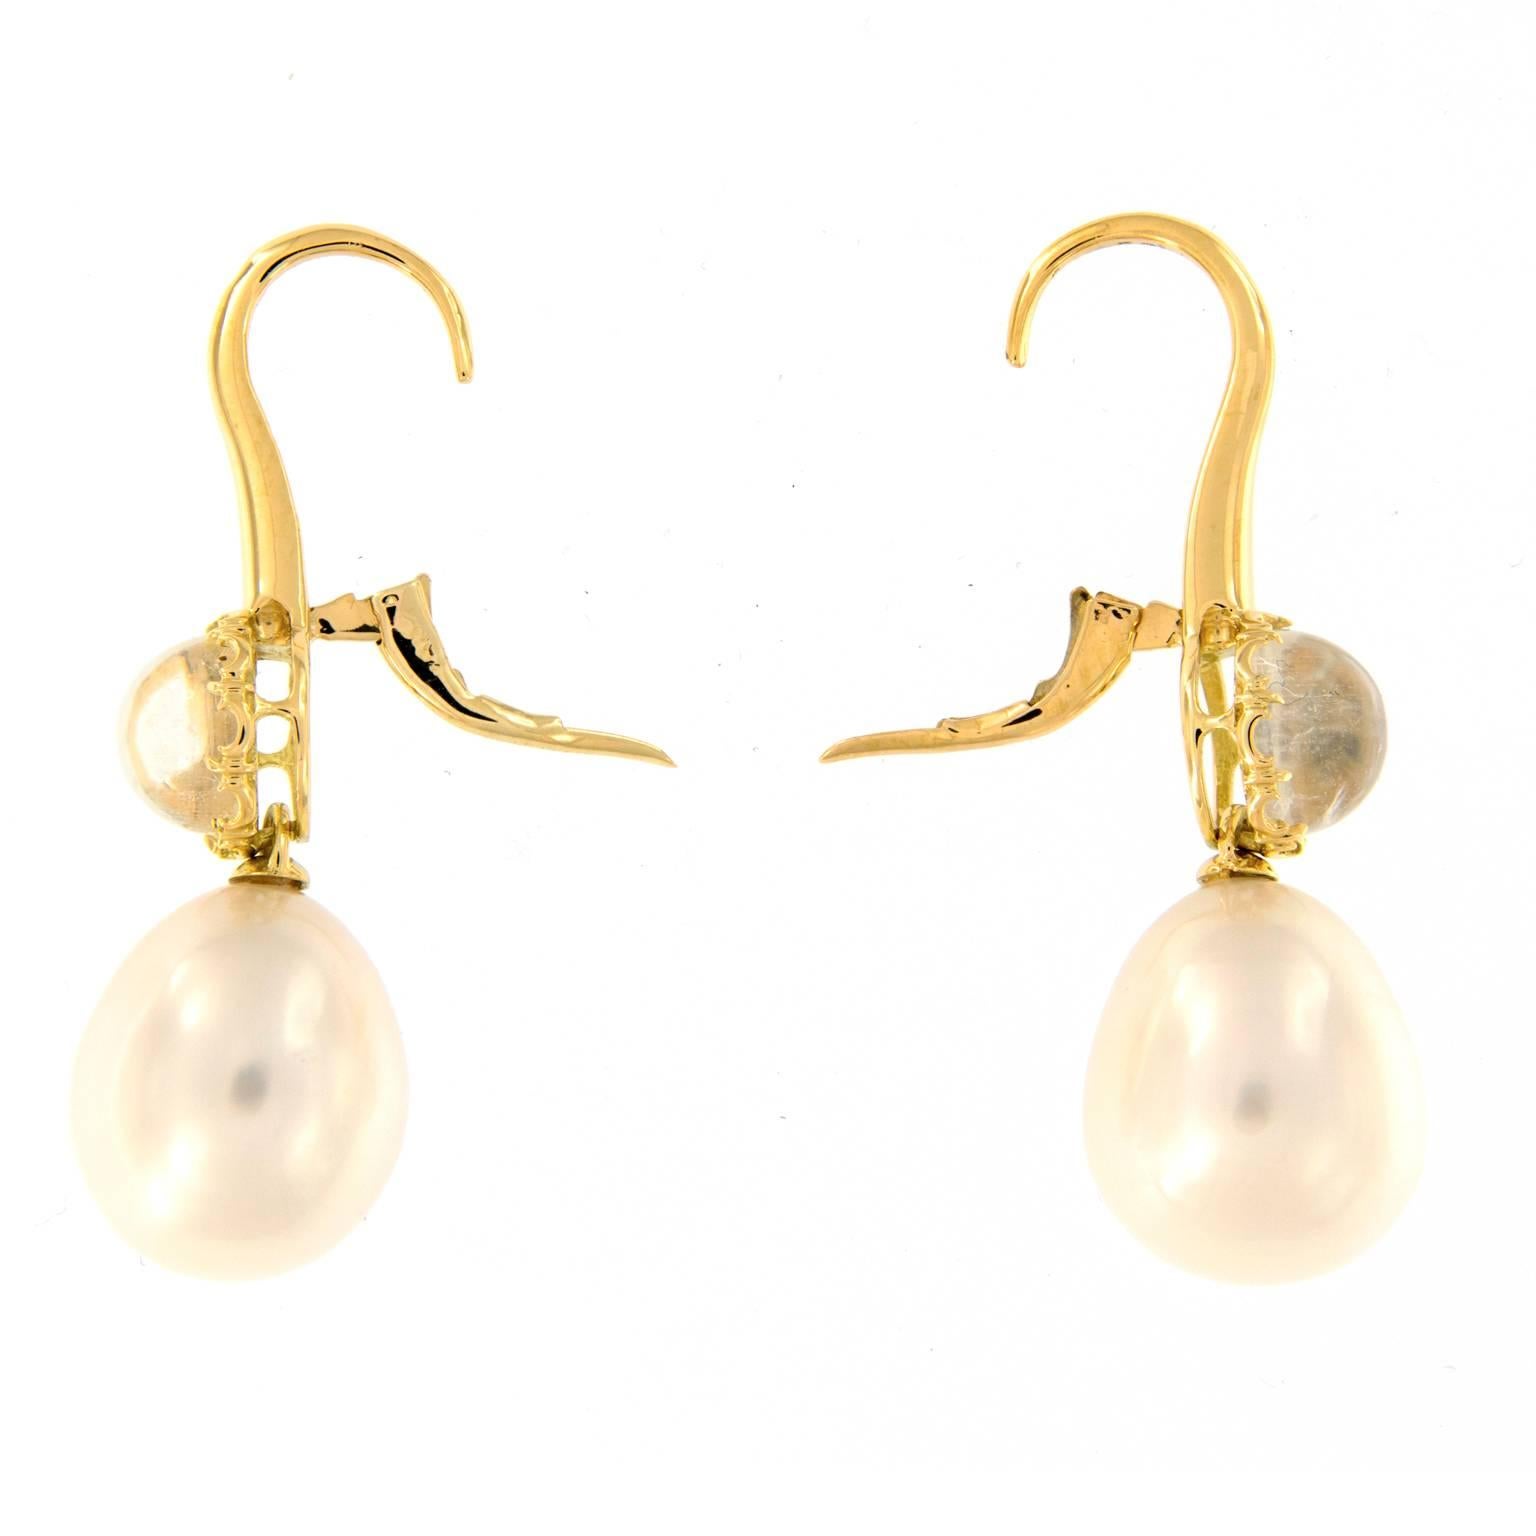 Lovely drop earrings from Assael feature a South Sea pearl that drops from a moonstone set in 18k yellow gold. Pearls 15.3 mm x 12.8 mm. Weigh 11.6 grams.

Moonstone 4.65 ct